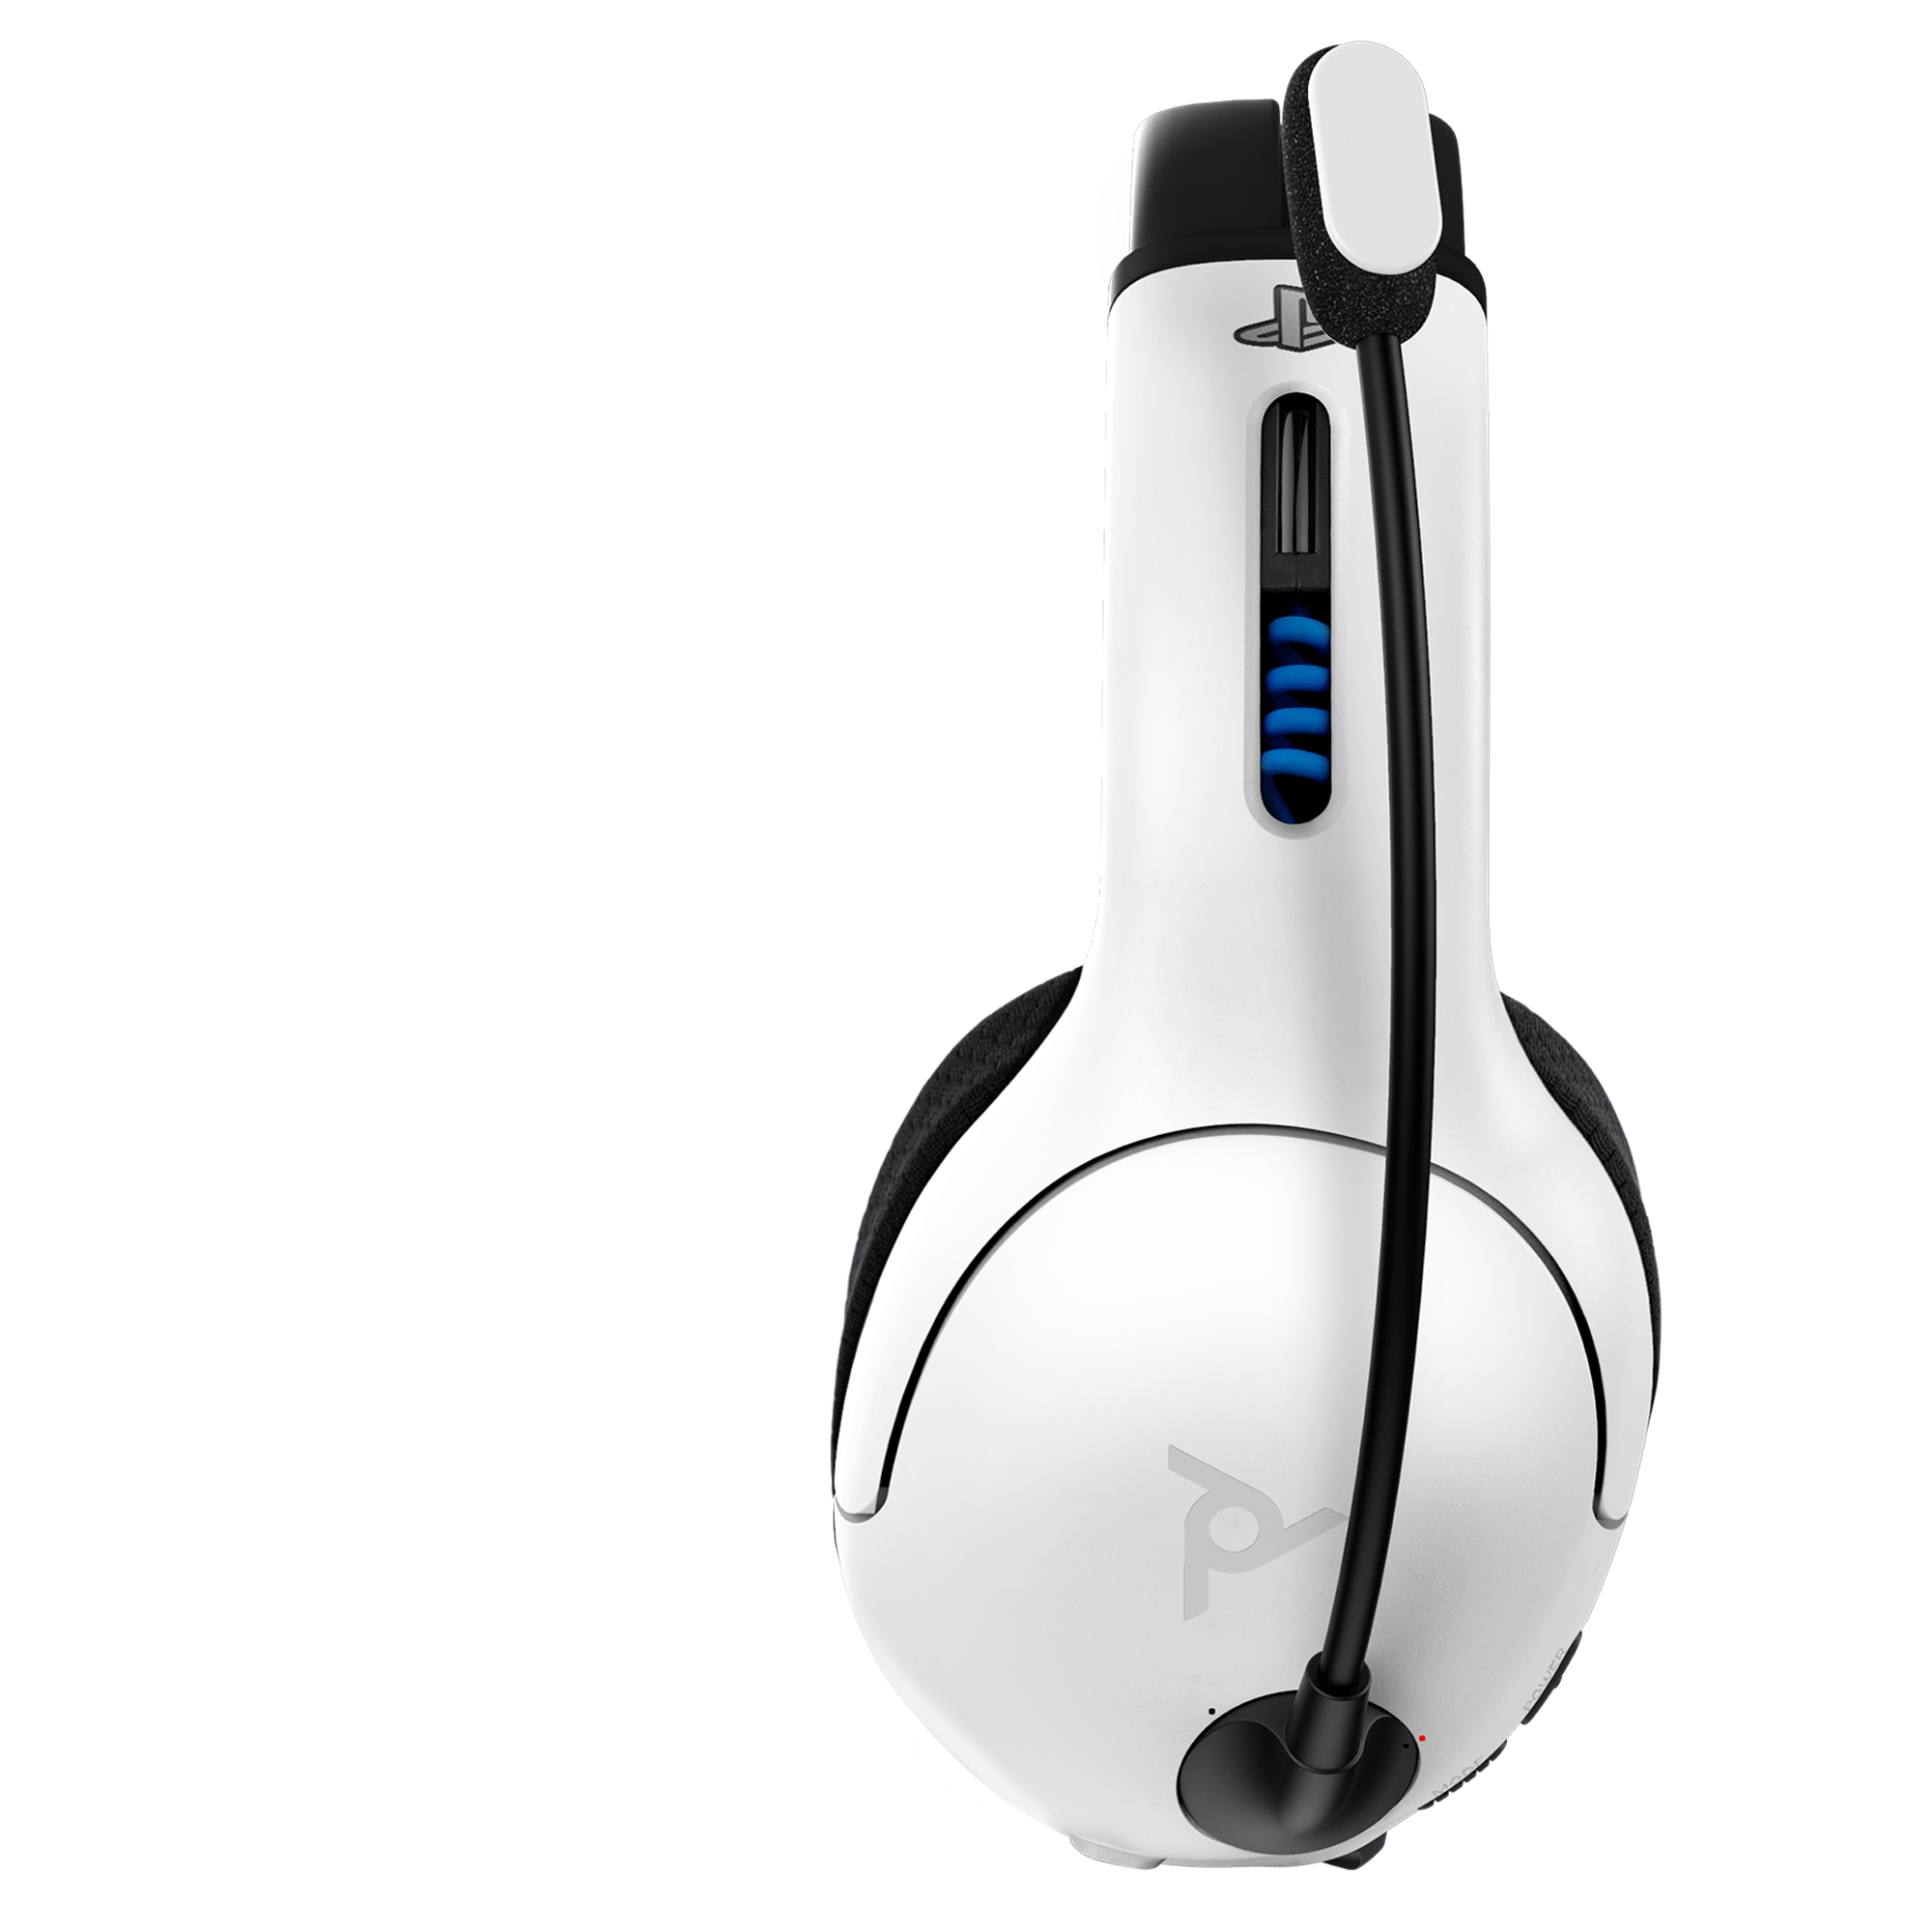 PDP Gaming Lvl40 Wired Stereo Headset - PS4